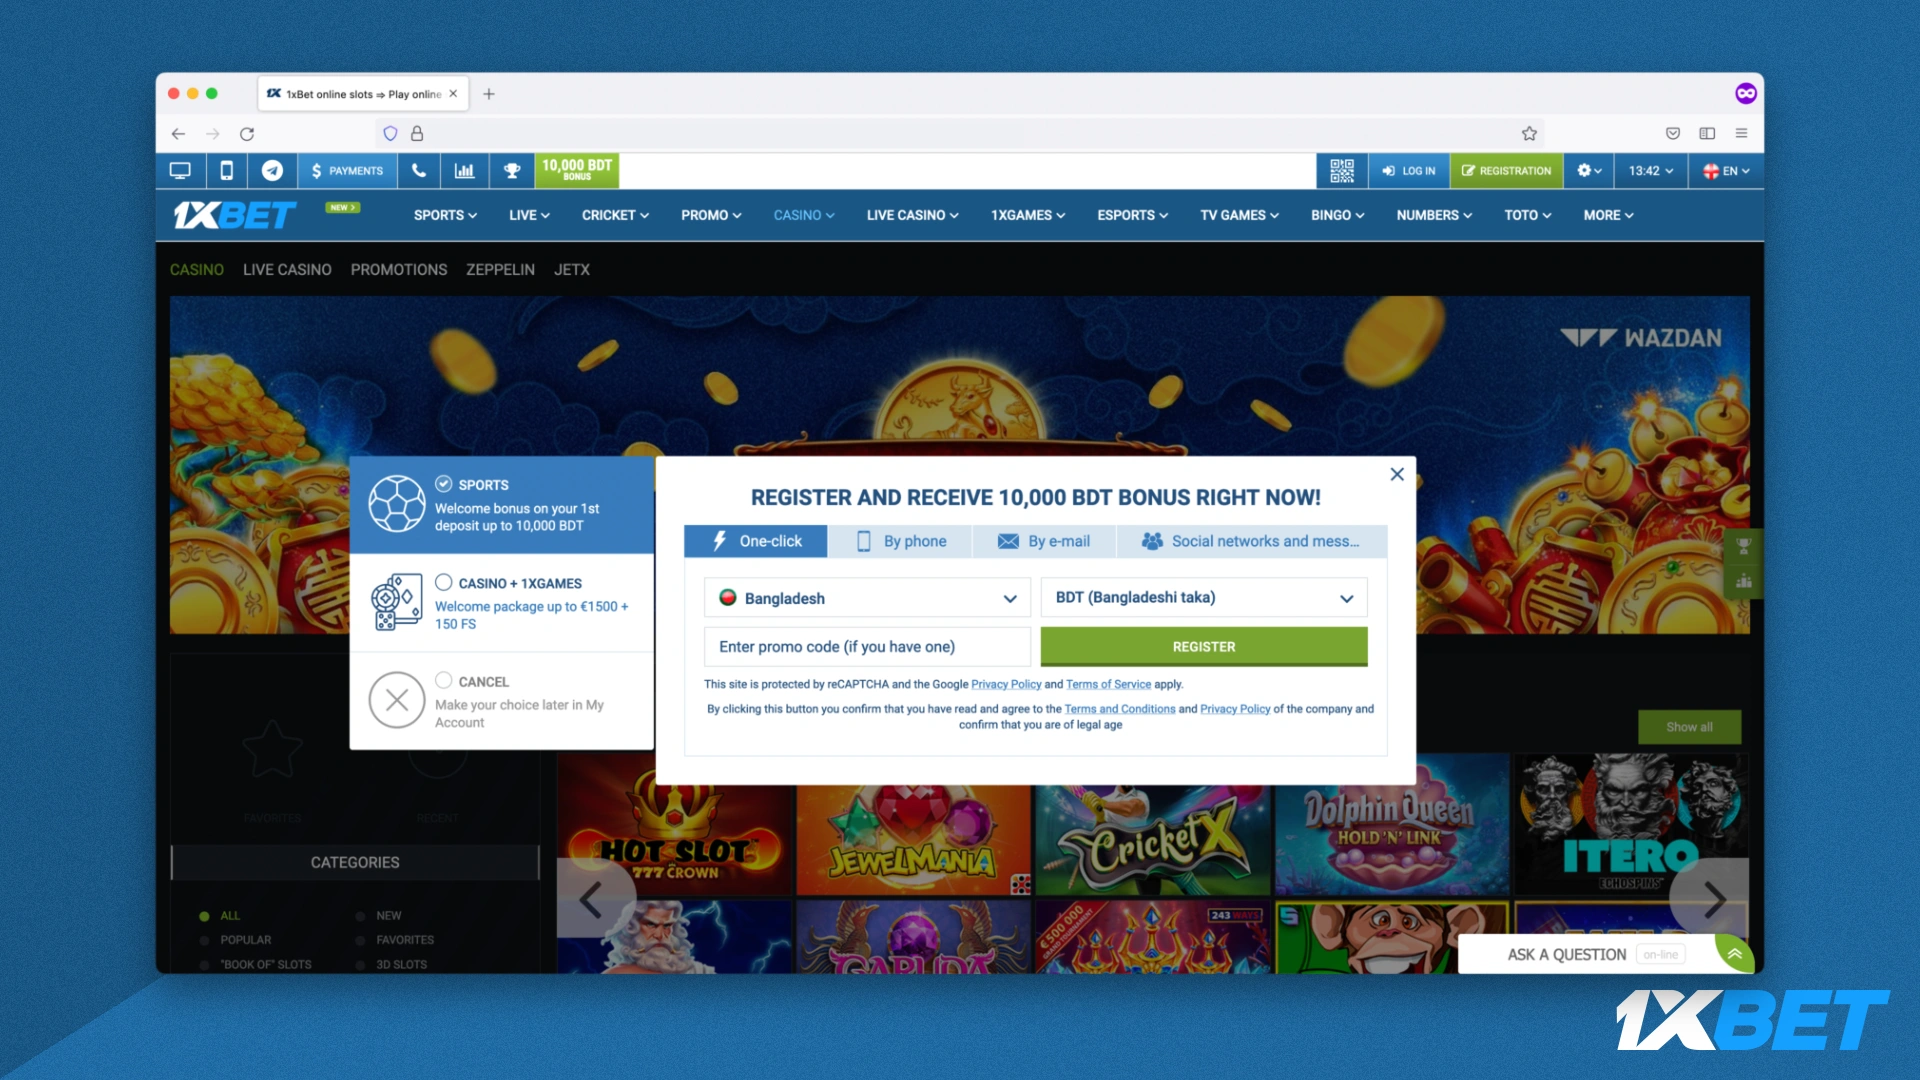 New user registration in the casino 1xbet